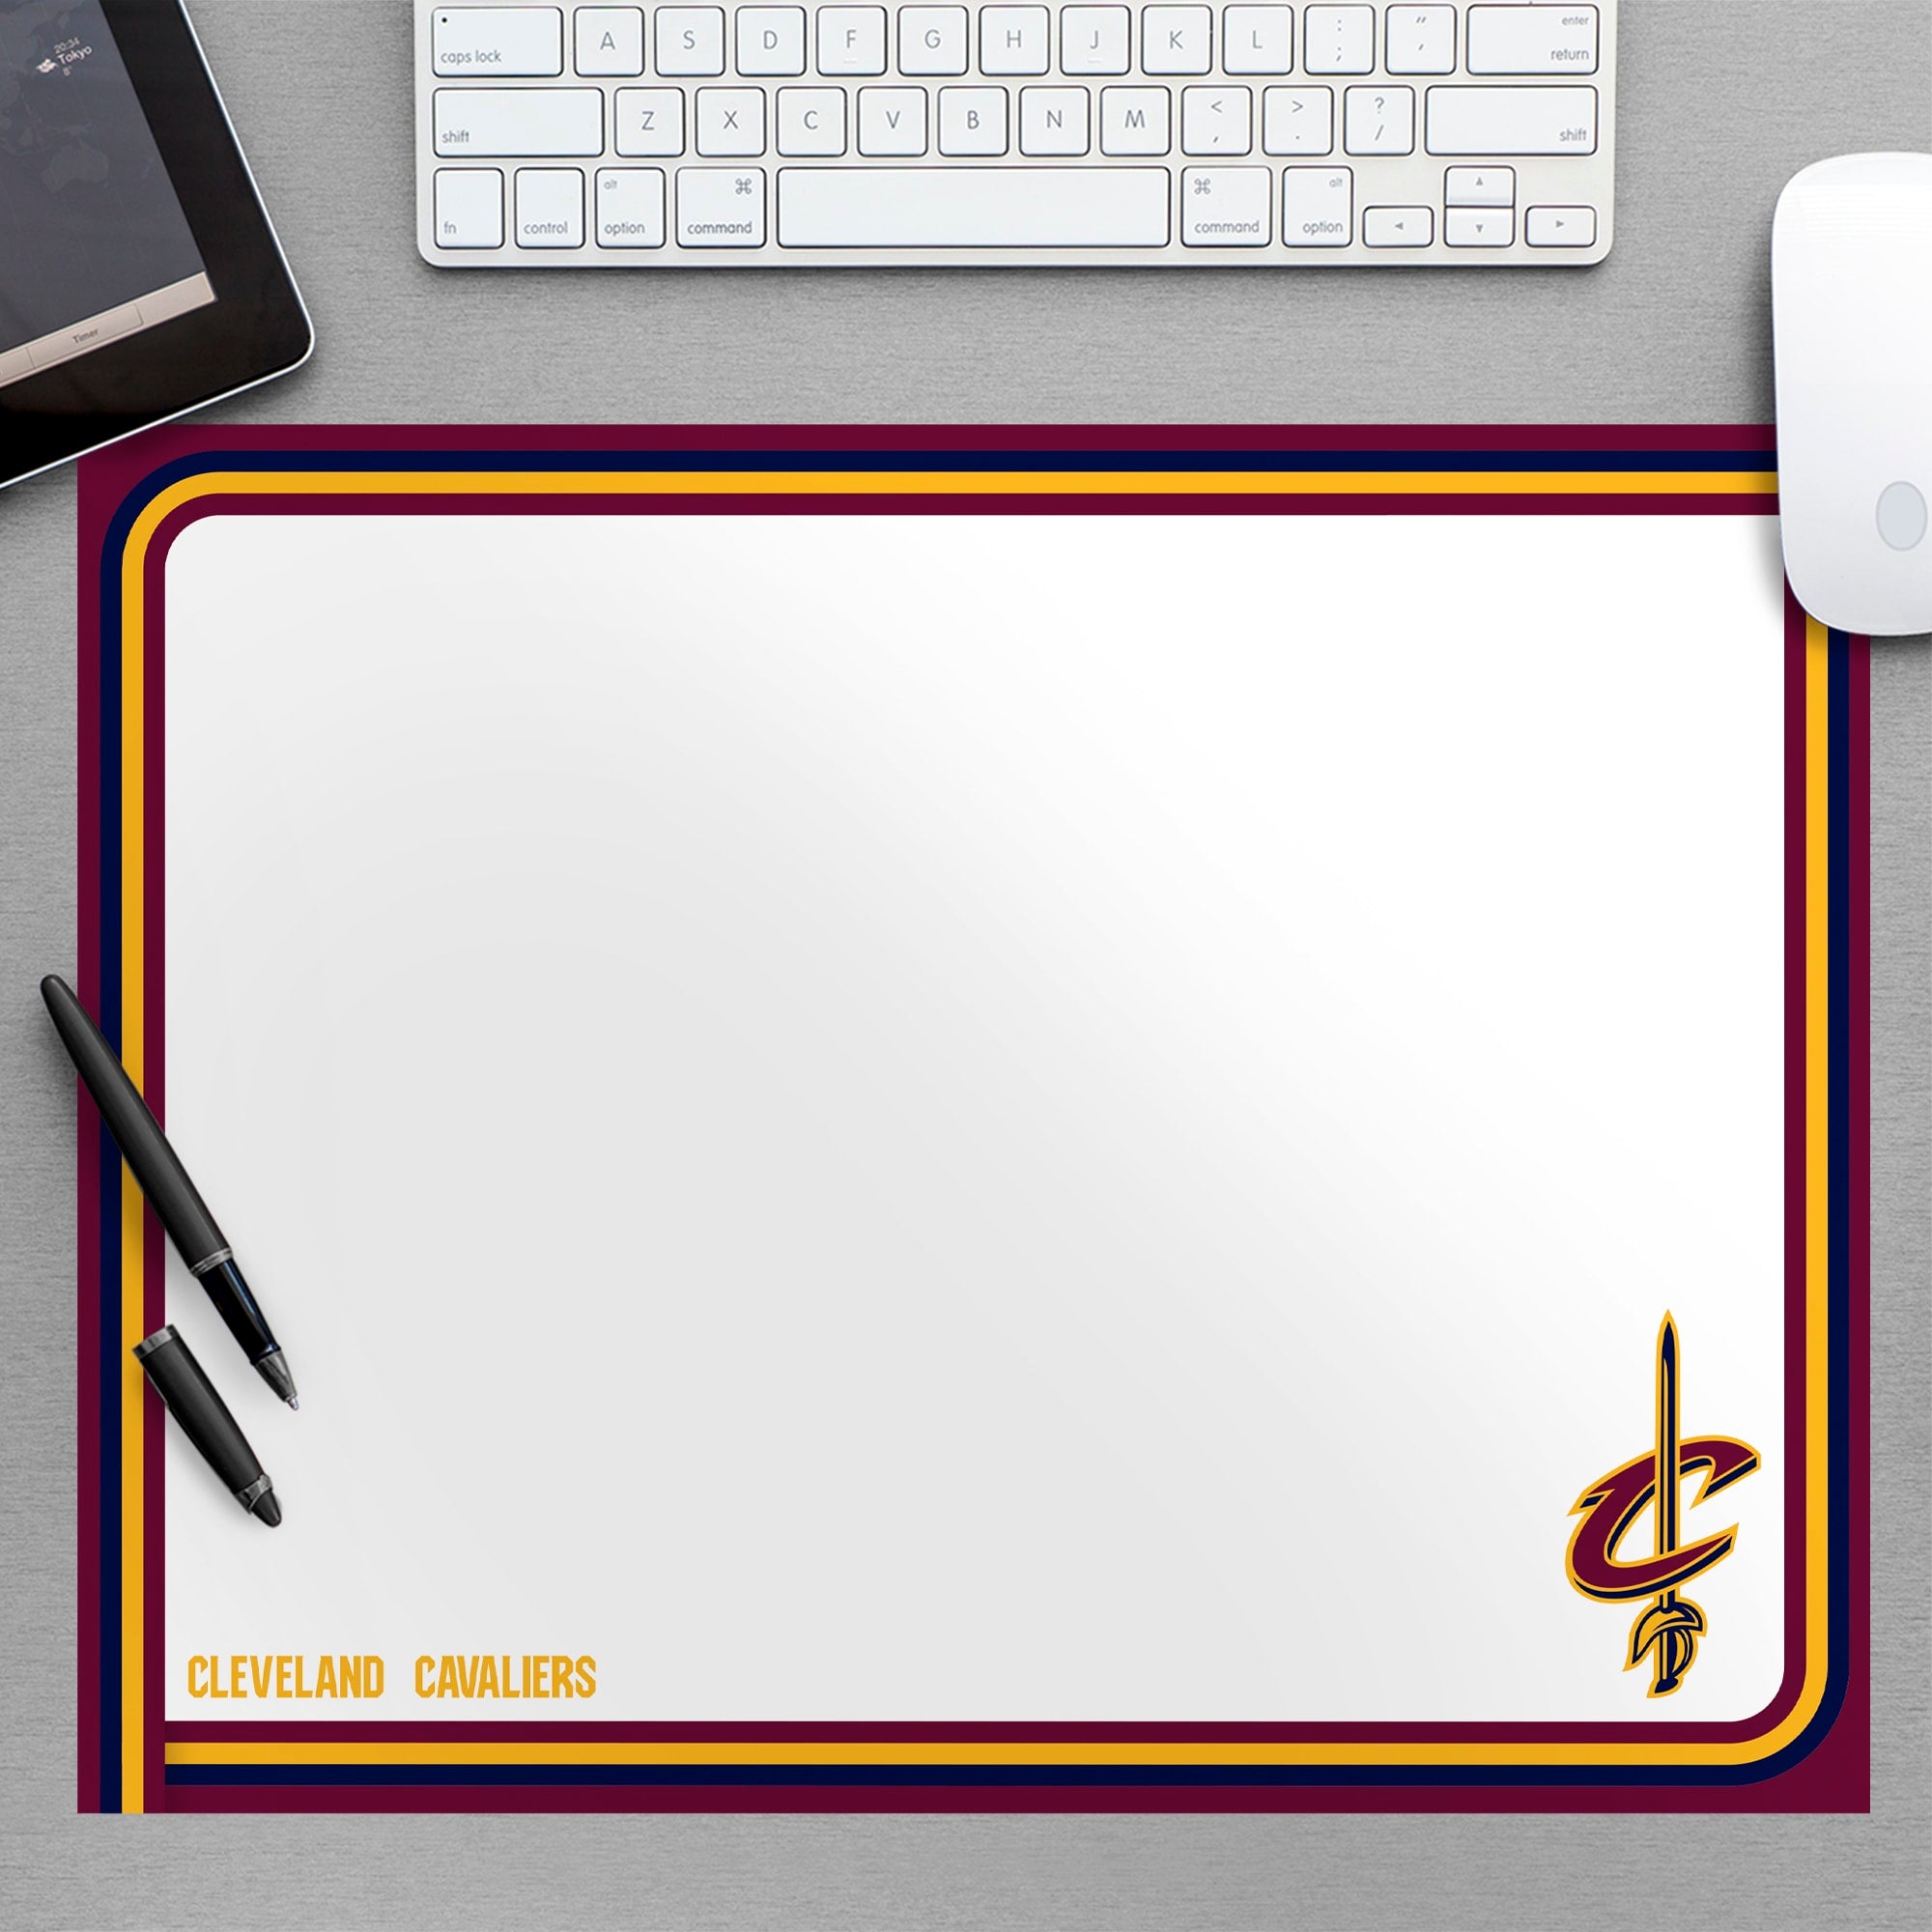 Cleveland Cavaliers for Cleveland Cavaliers: Dry Erase Whiteboard - Officially Licensed NBA Removable Wall Decal Large by Fathea